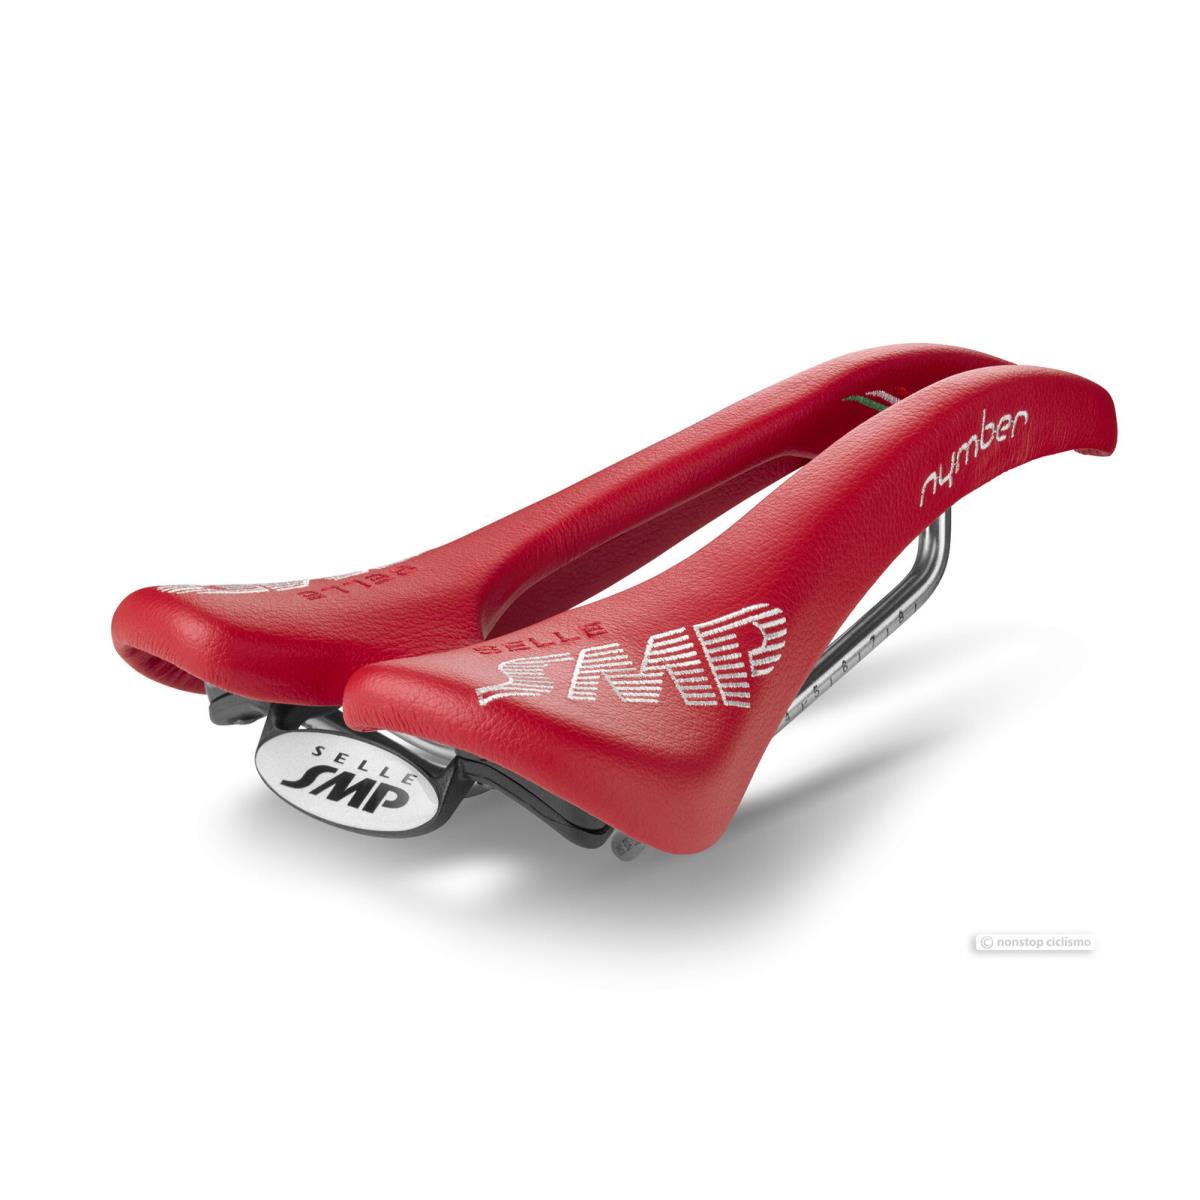 Selle Smp Nymber Saddle : Red - Made IN Italy